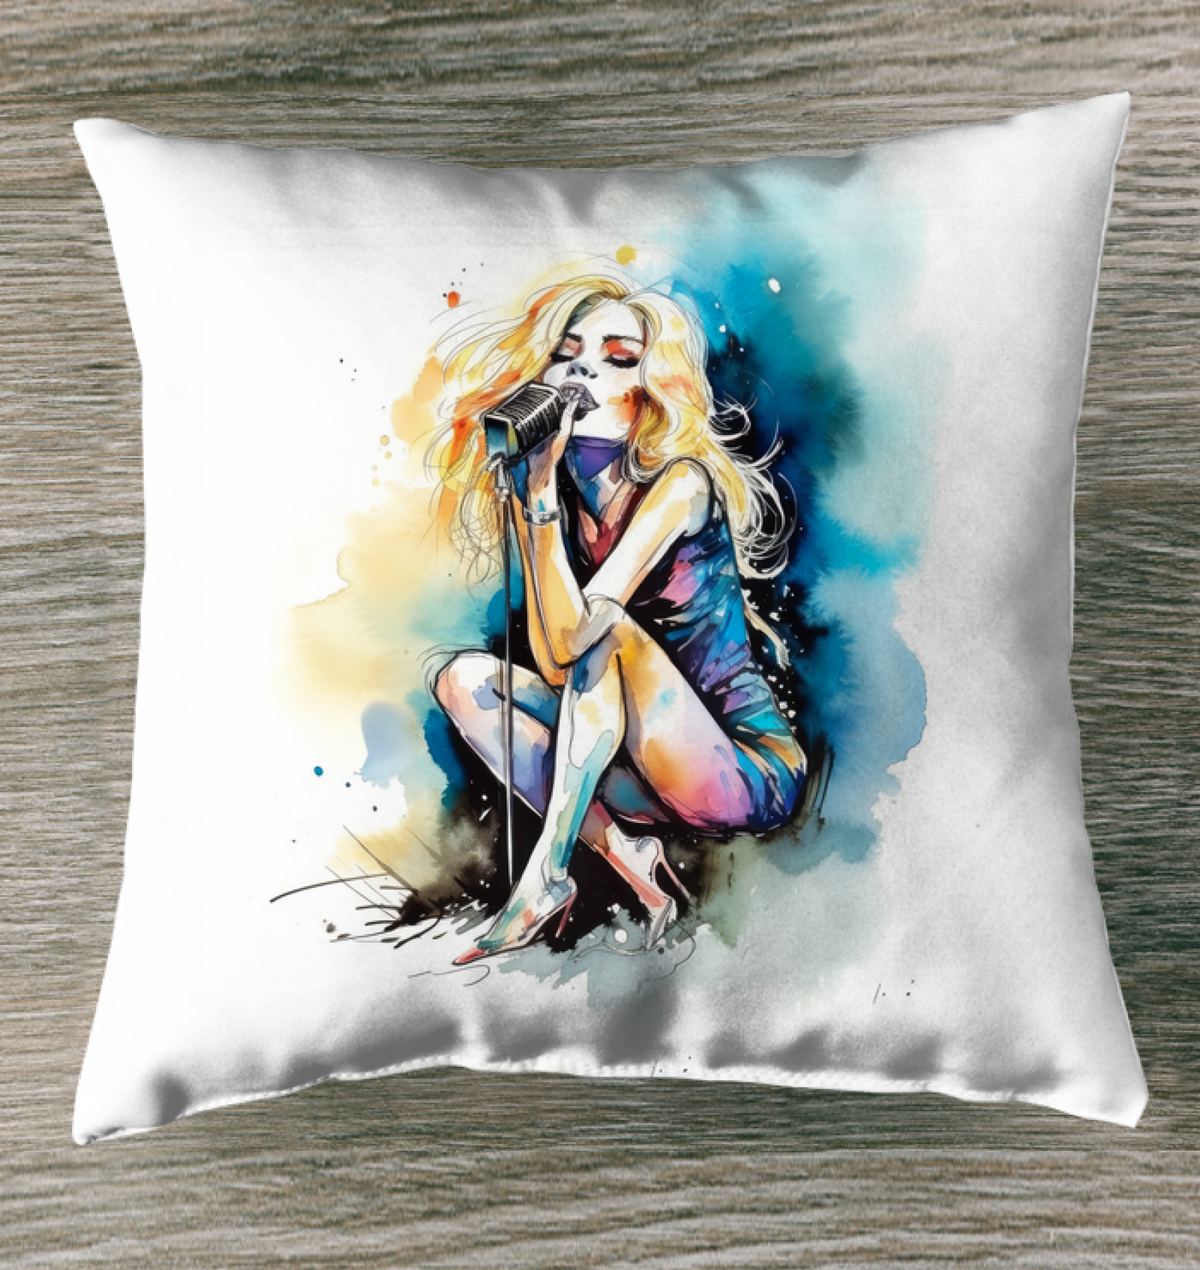 Charismatic Cowboy's Country Comfort Outdoor Pillow